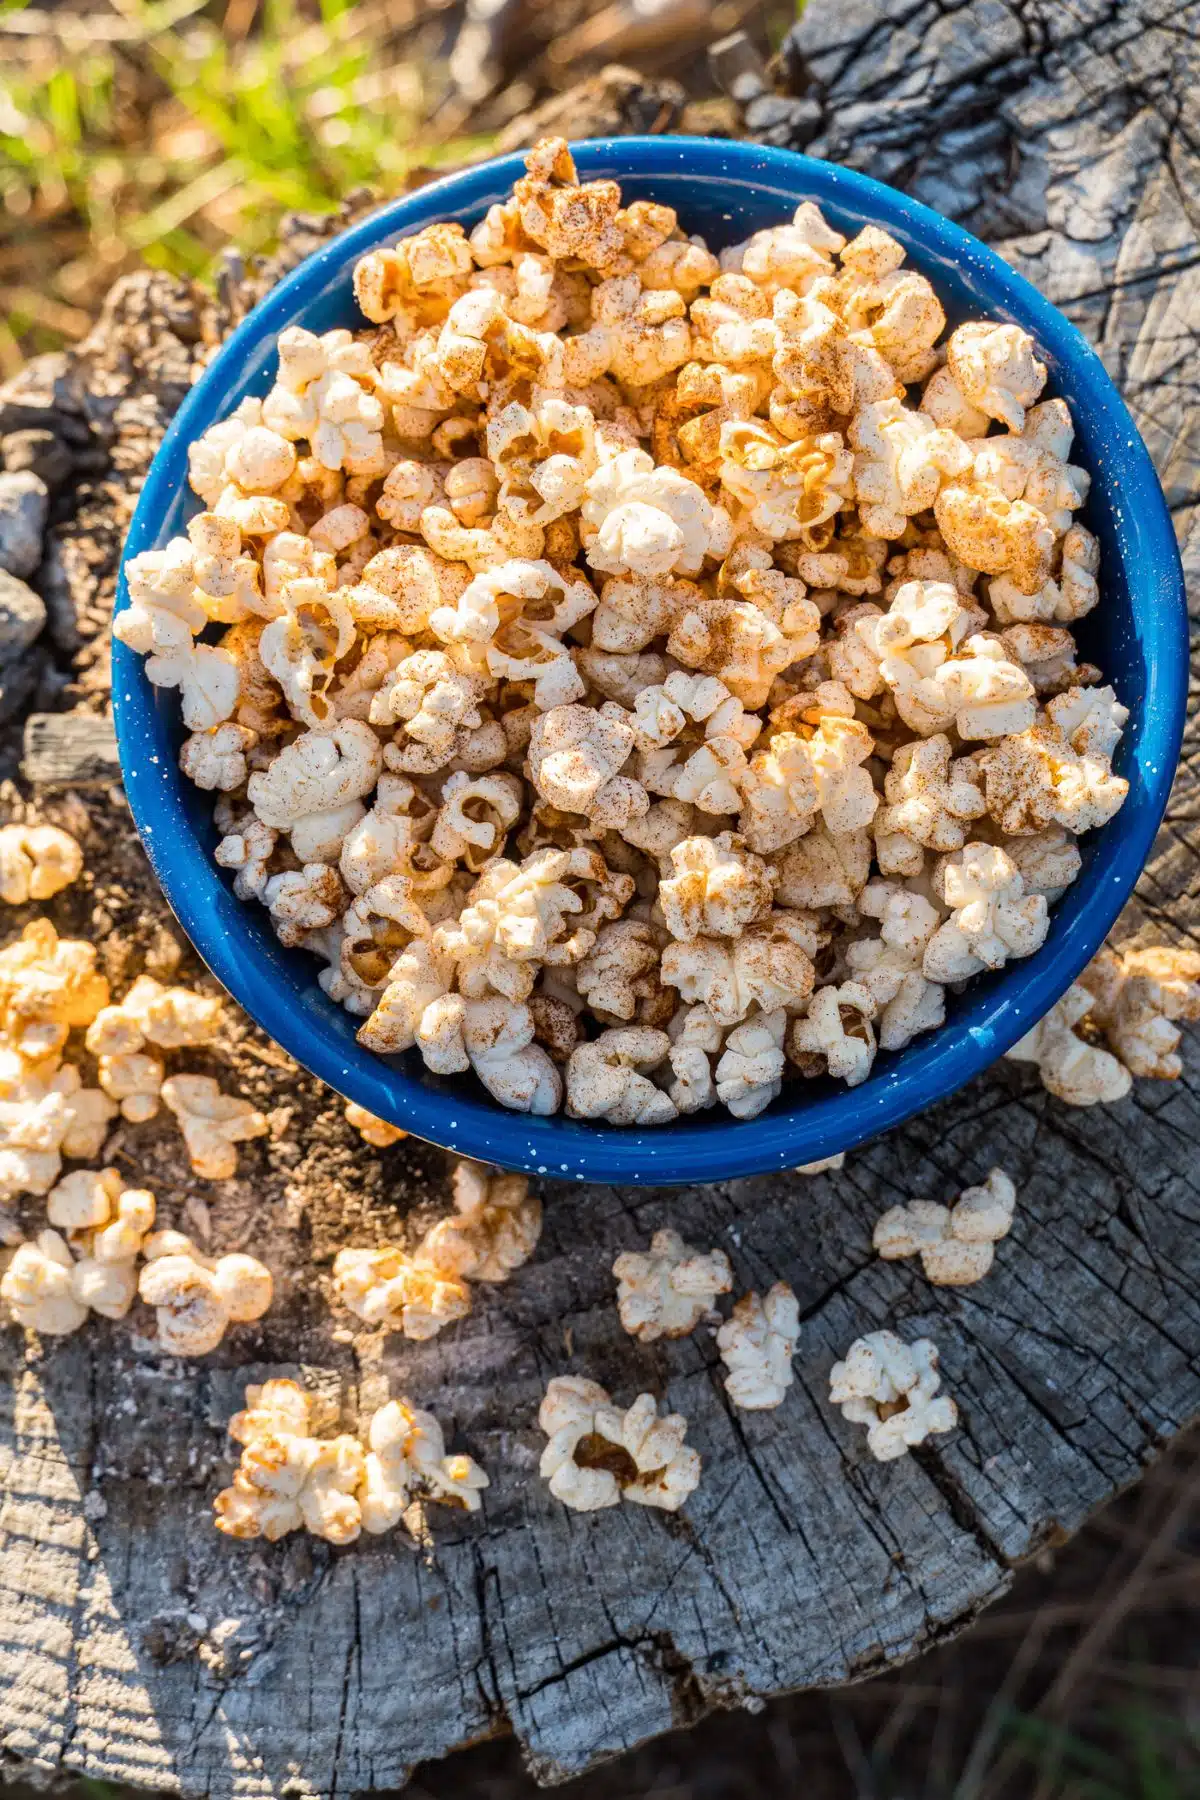 Popcorn in a blue bowl on a stump.